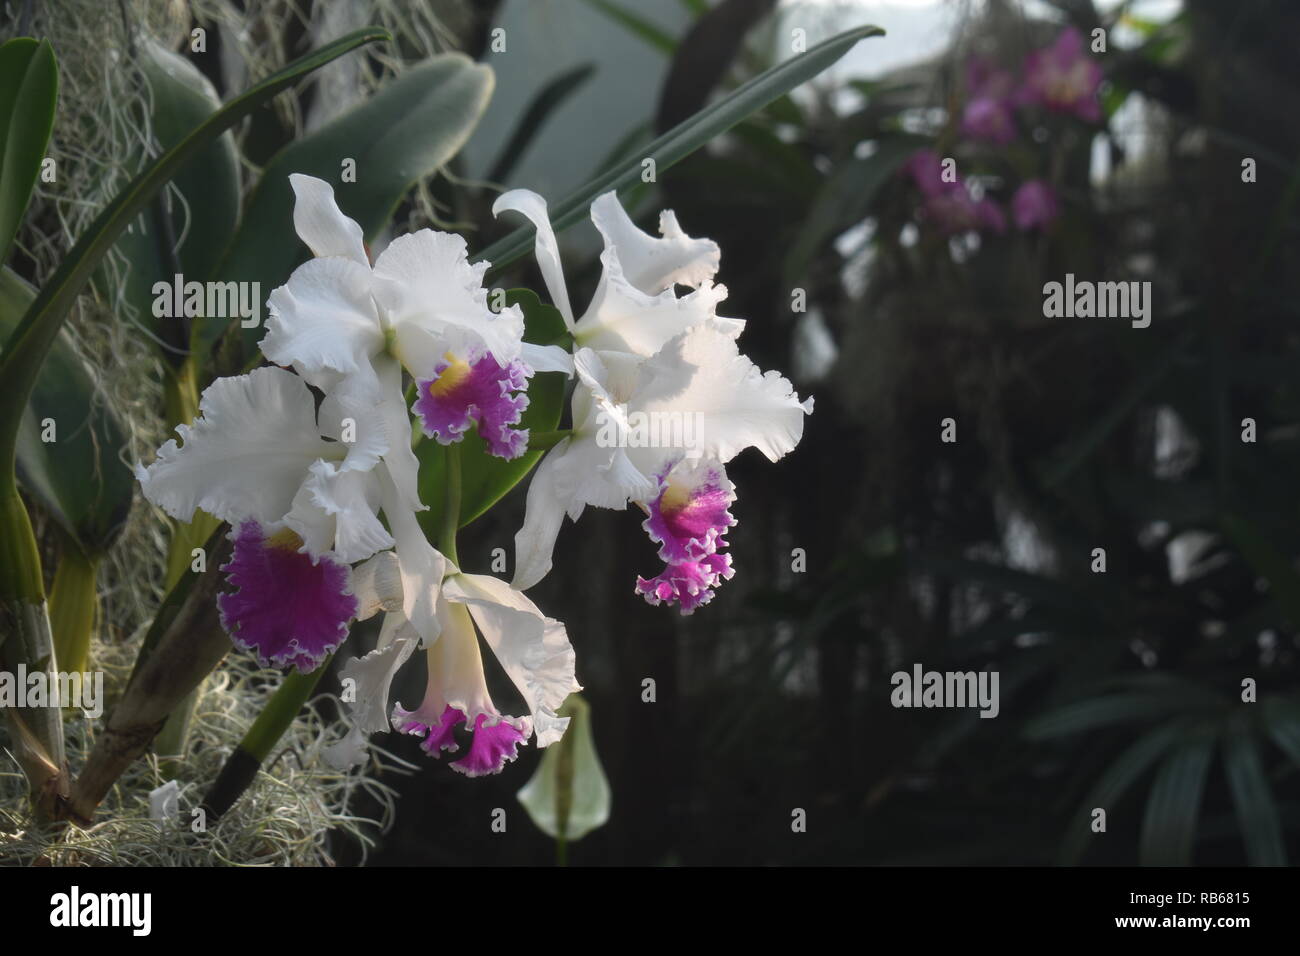 Violet and White Cattleya Orchids - Beautiful and colorful varieties of orchids grown in a local nursery Stock Photo